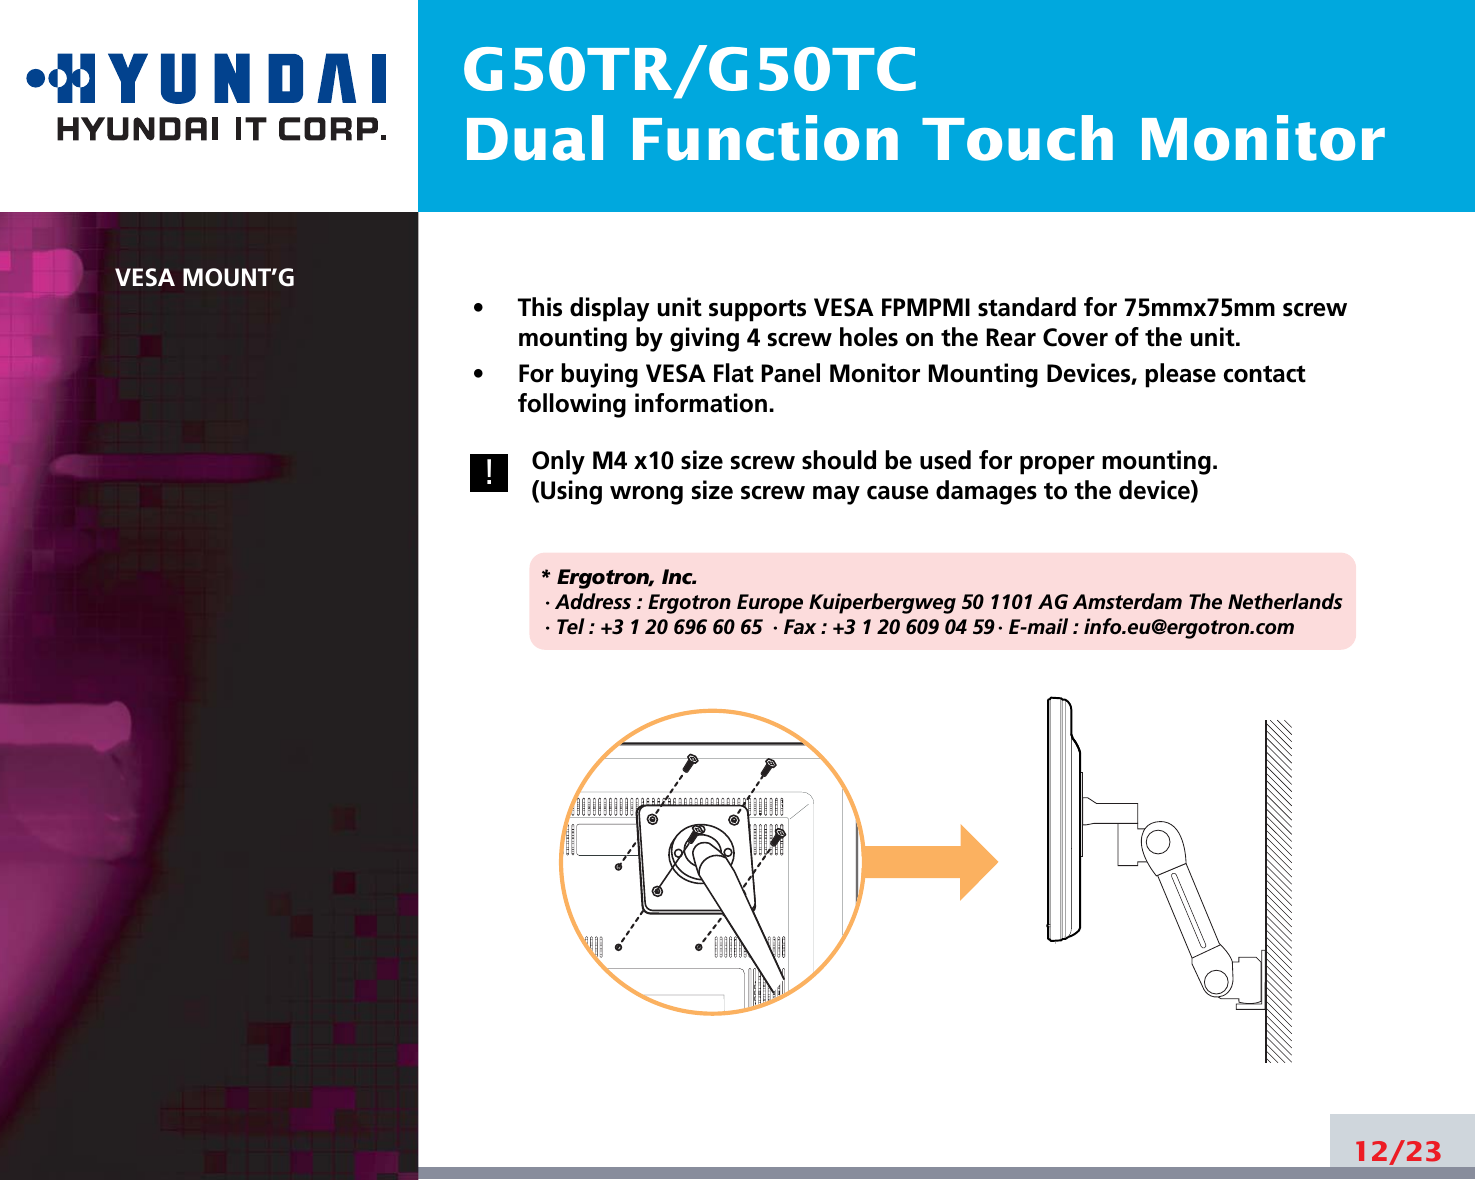 G50TR/G50TCDual Function Touch MonitorVESA MOUNT’G•     This display unit supports VESA FPMPMI standard for 75mmx75mm screwmounting by giving 4 screw holes on the Rear Cover of the unit.•     For buying VESA Flat Panel Monitor Mounting Devices, please contactfollowing information.Only M4 x10 size screw should be used for proper mounting.(Using wrong size screw may cause damages to the device)* Ergotron, Inc.· Address : Ergotron Europe Kuiperbergweg 50 1101 AG Amsterdam The Netherlands· Tel : +3 1 20 696 60 65 · Fax : +3 1 20 609 04 59 · E-mail : info.eu@ergotron.com12/23!